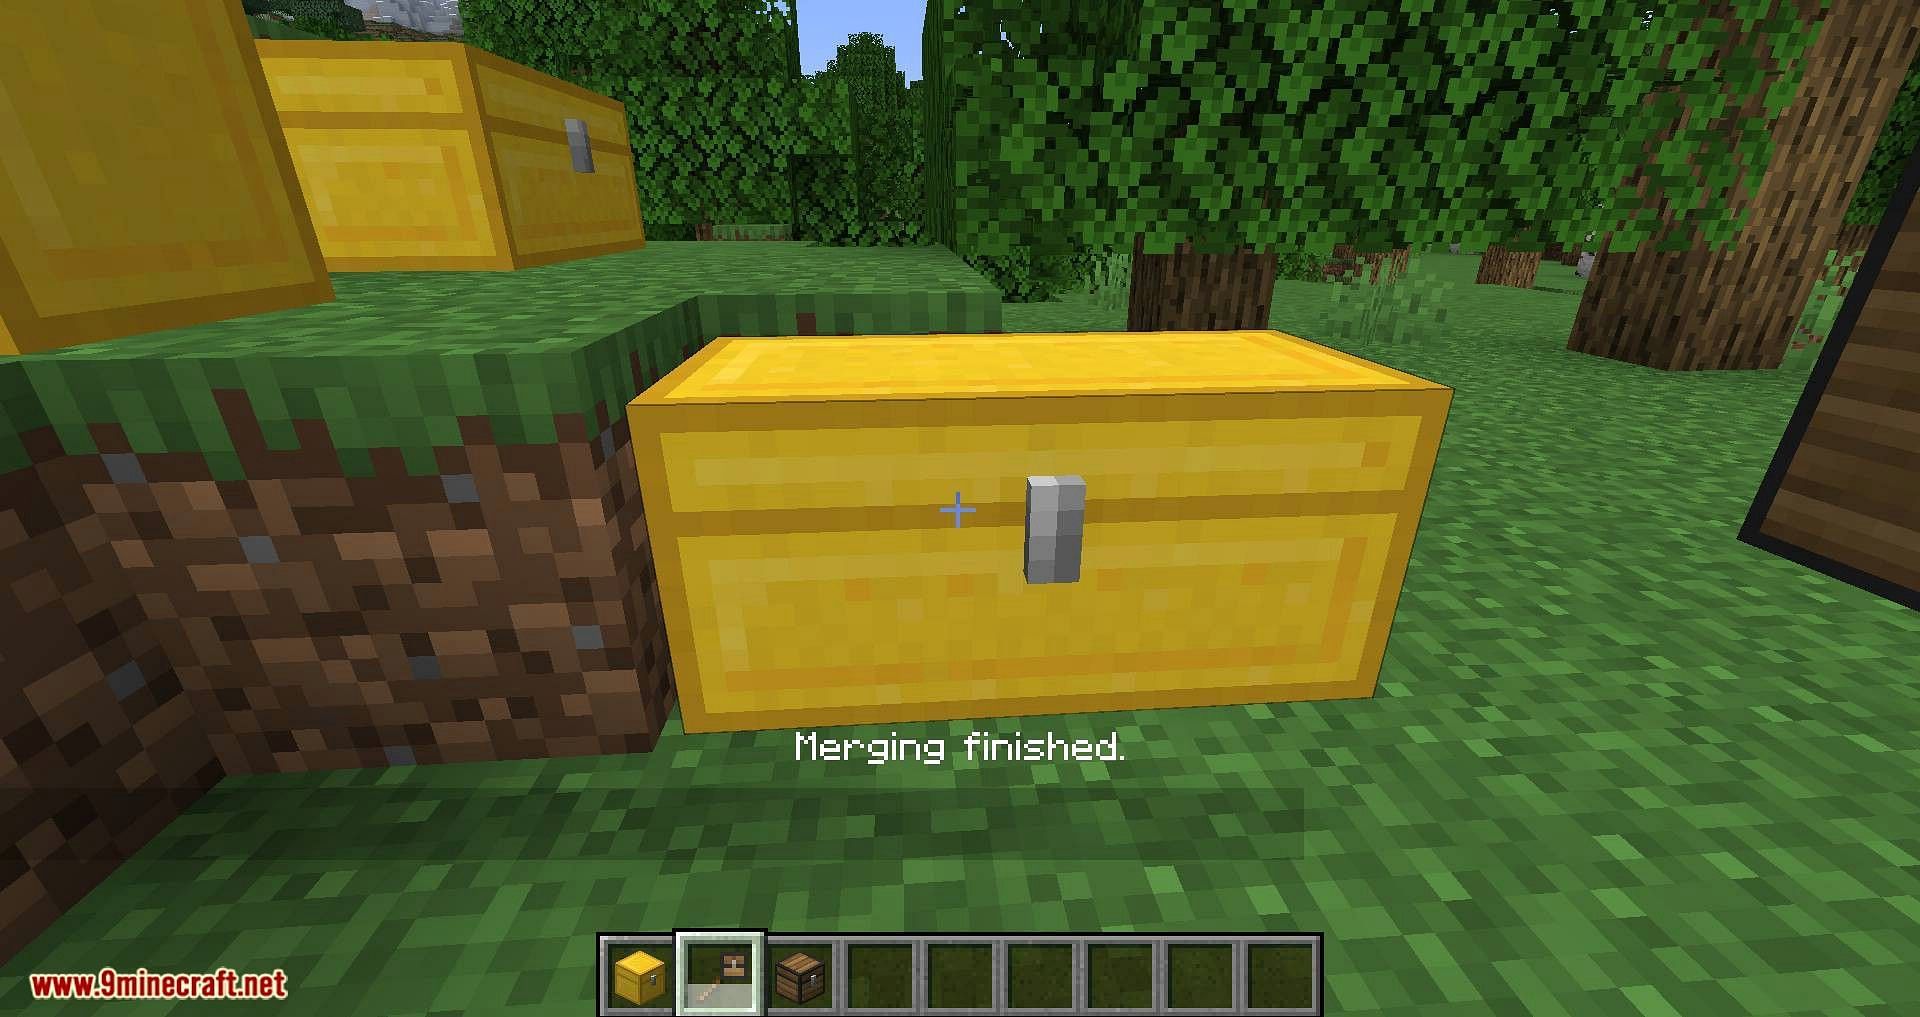 This mod adds a variety of chests to Minecraft (Image via Minecraft)